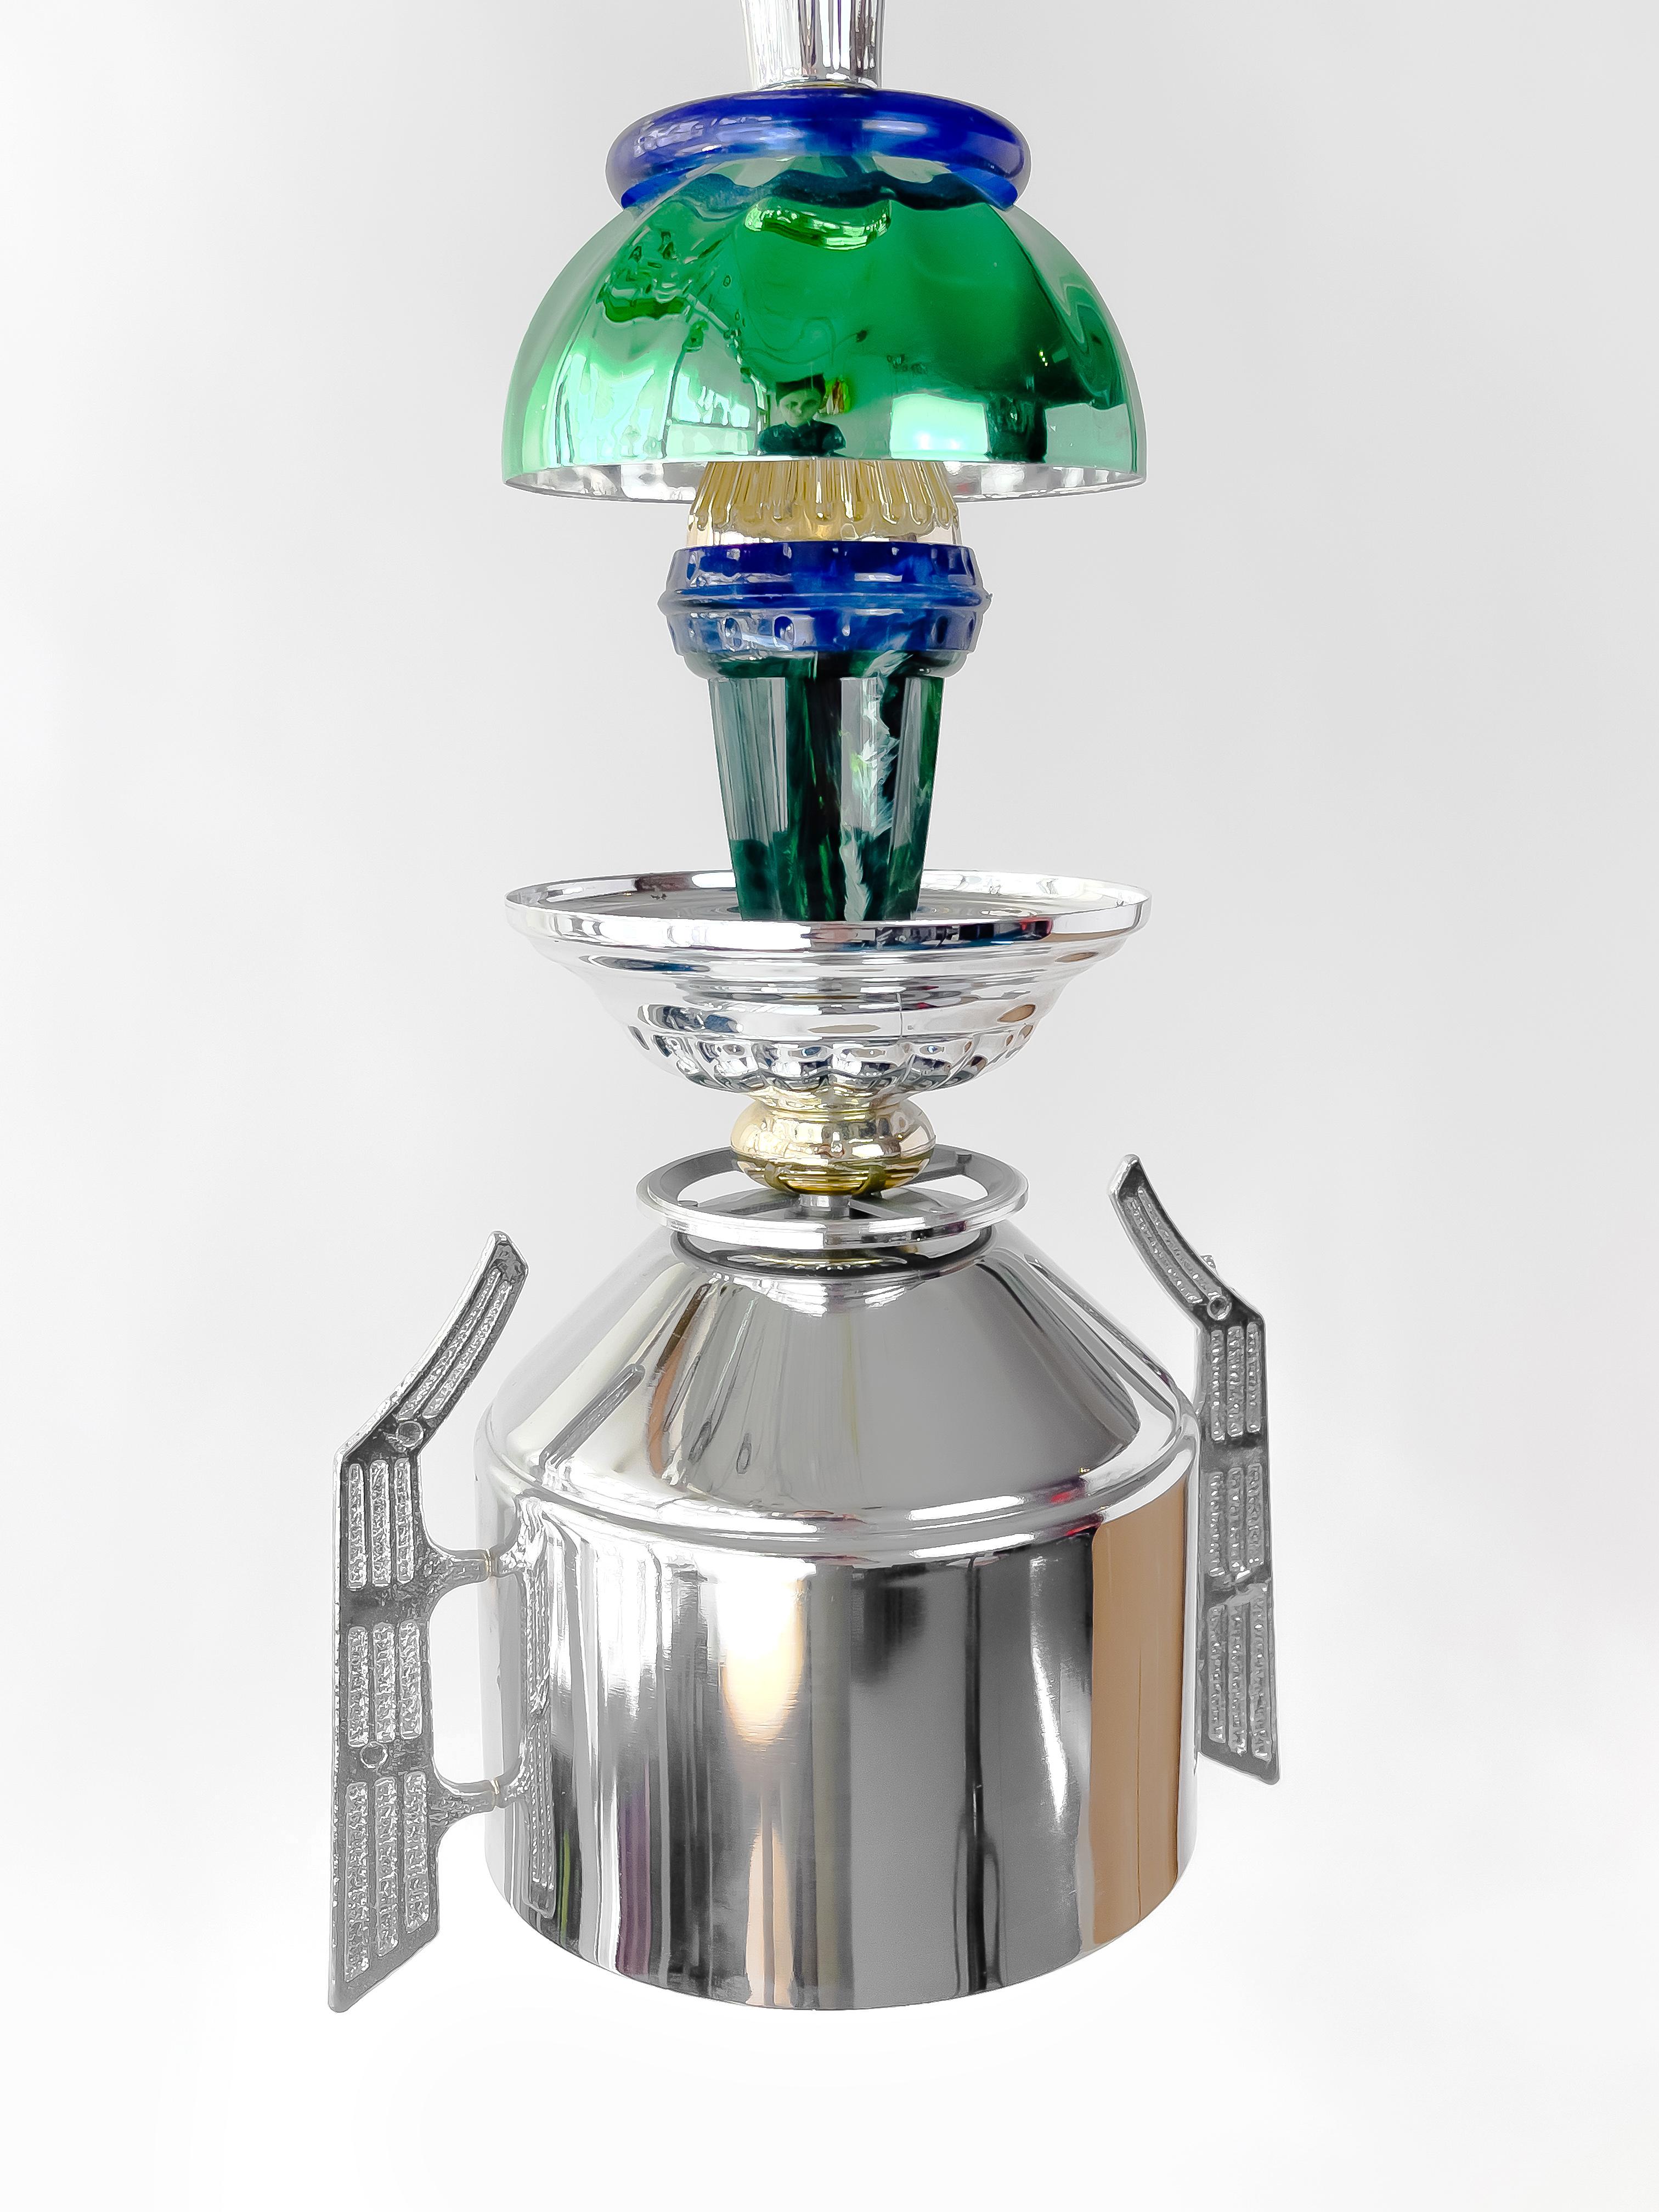 Green, blue L50 Light by Flétta
Dimensions: D 10 x H 53 cm (dimensions are variable)
Cord: 250 cm
Materials: silver, gold

Trophy is a collection of tables, lights, flowerpots and shelves made of old trophies collected from athletes and sports